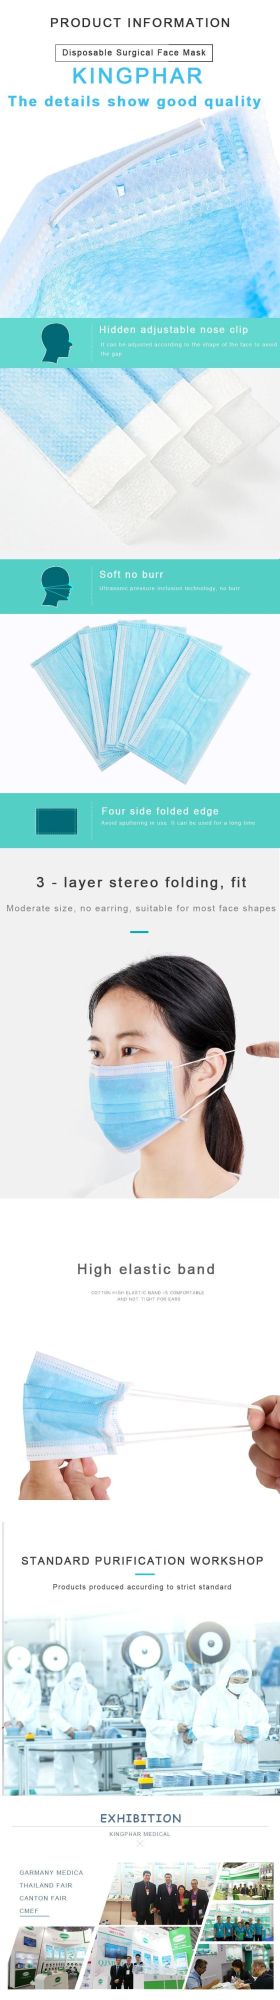 Diposable Surgical Mask From Kingphar